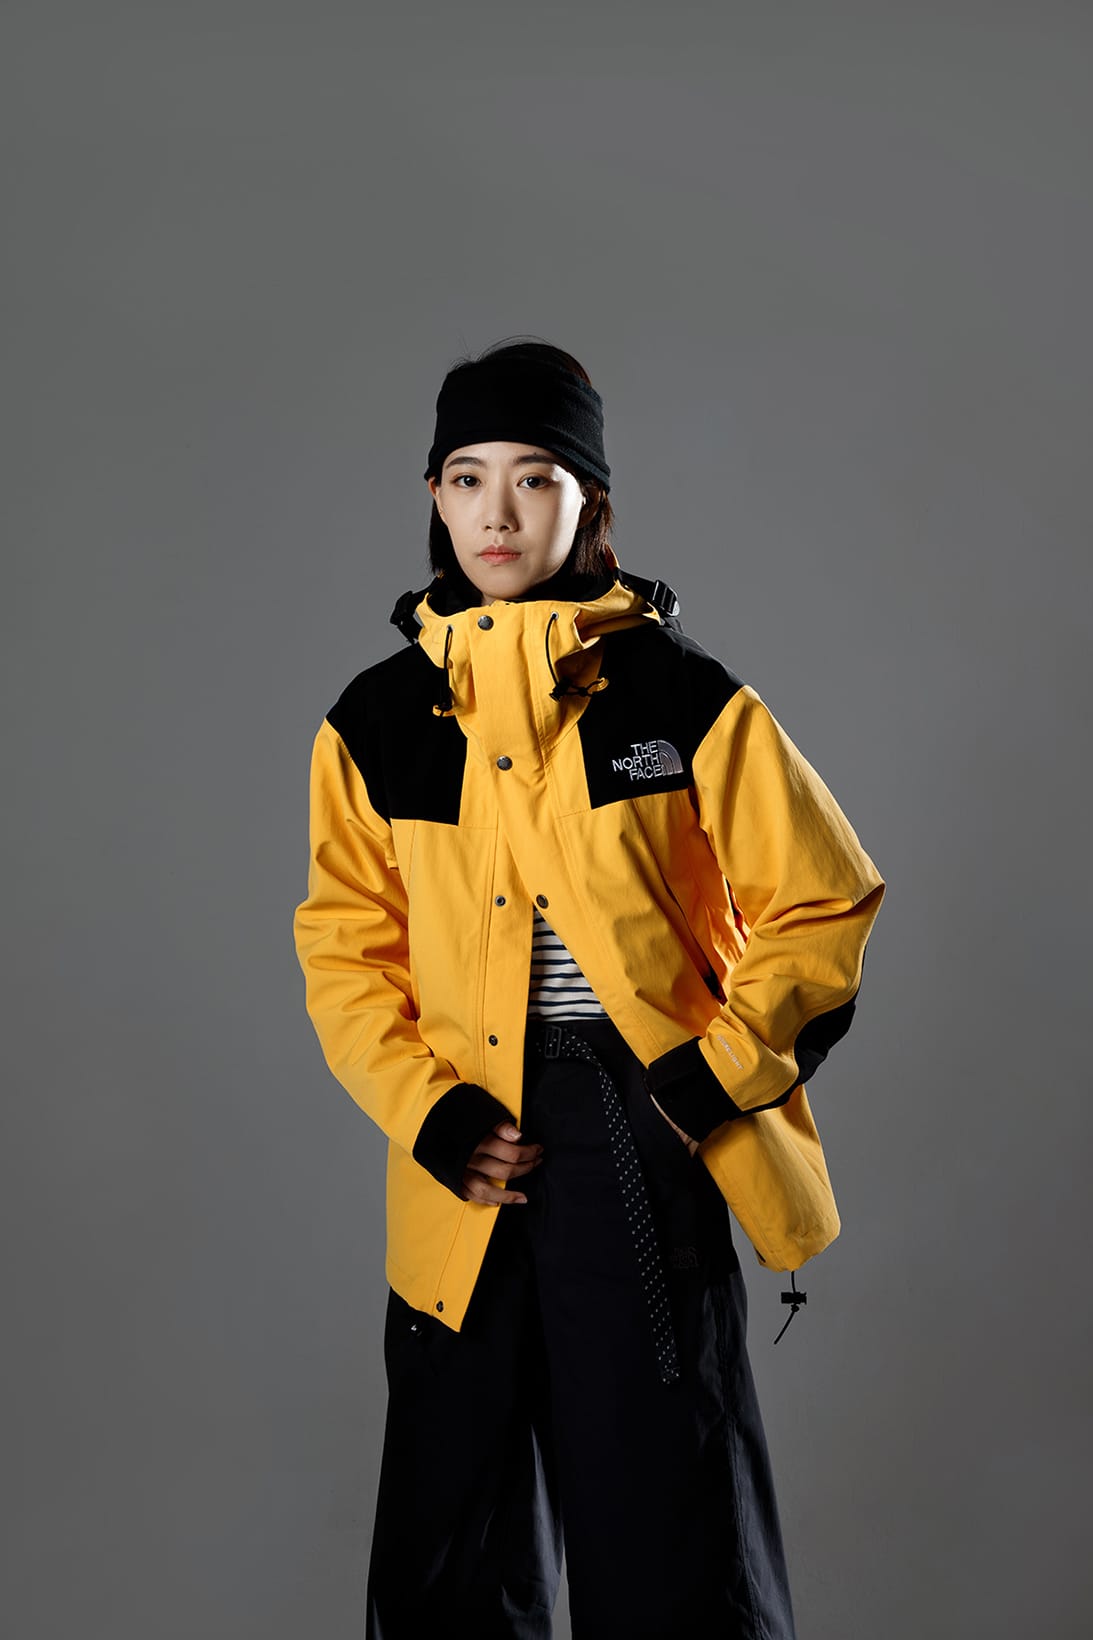 the north face 1990 mountain jacket womens